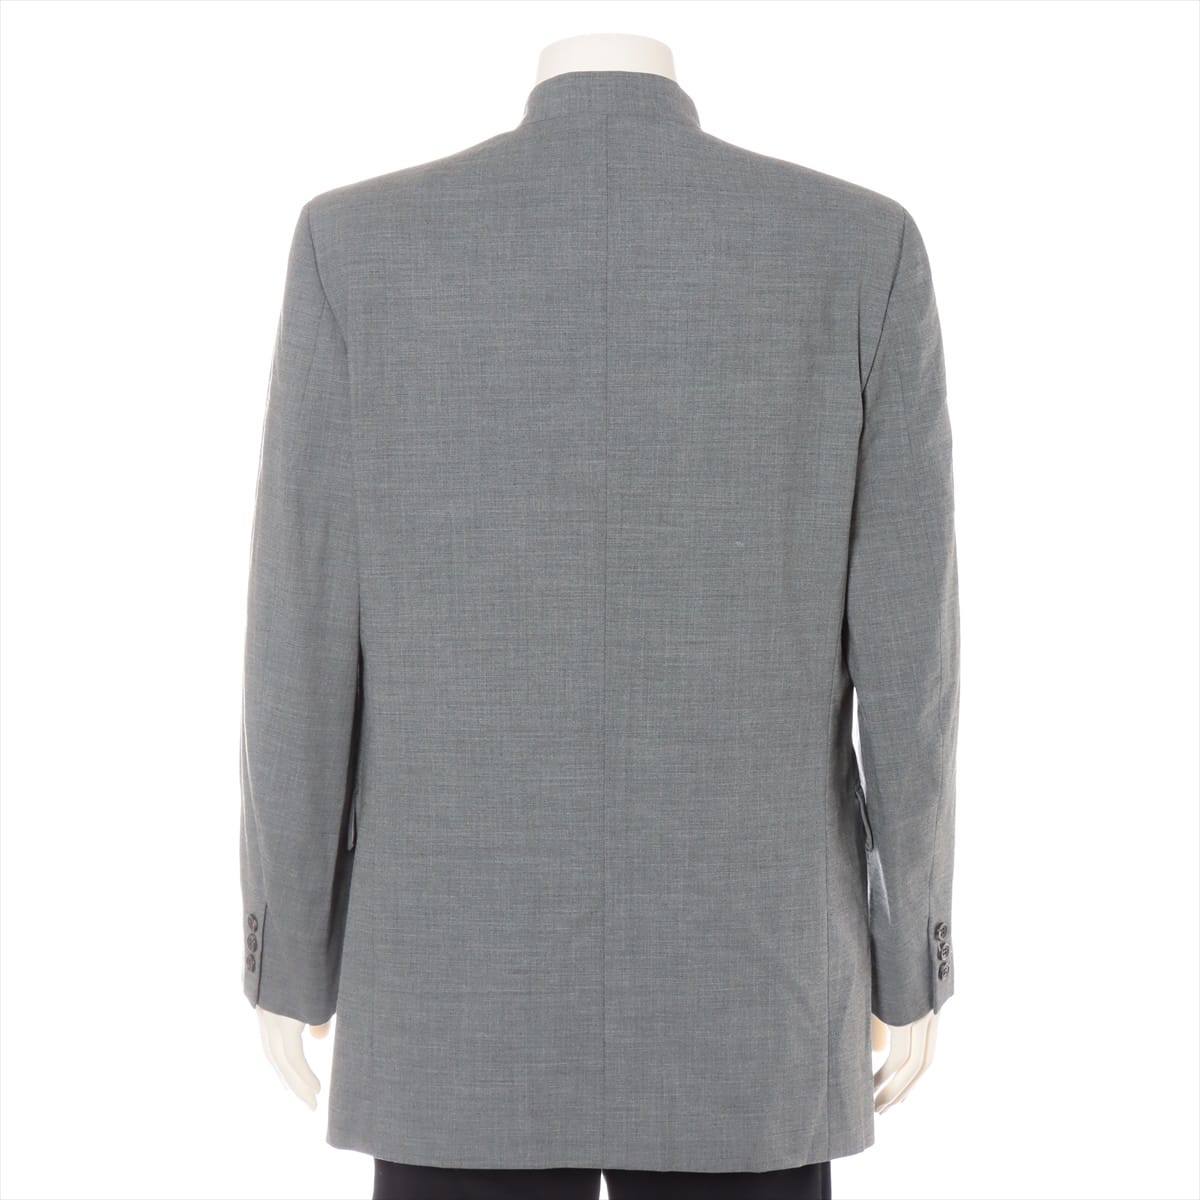 Issey Miyake  Hair Suit jacket 8 Men's Grey  Mao color Comes with shoulder pads